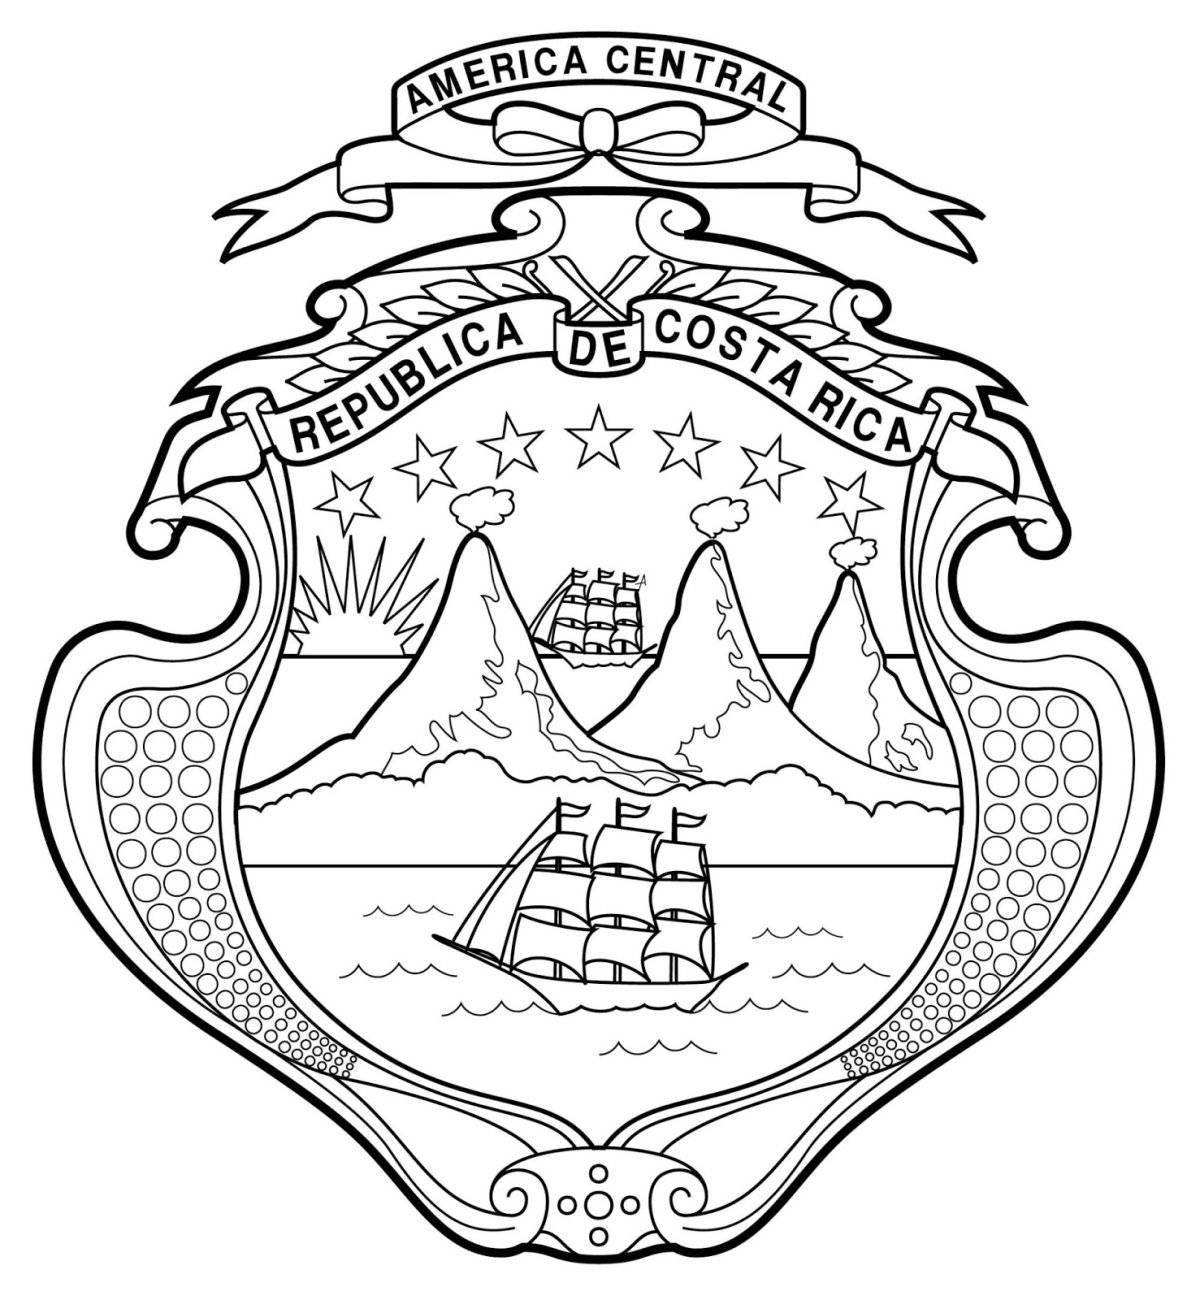 Coloring bright coat of arms of Yekaterinburg